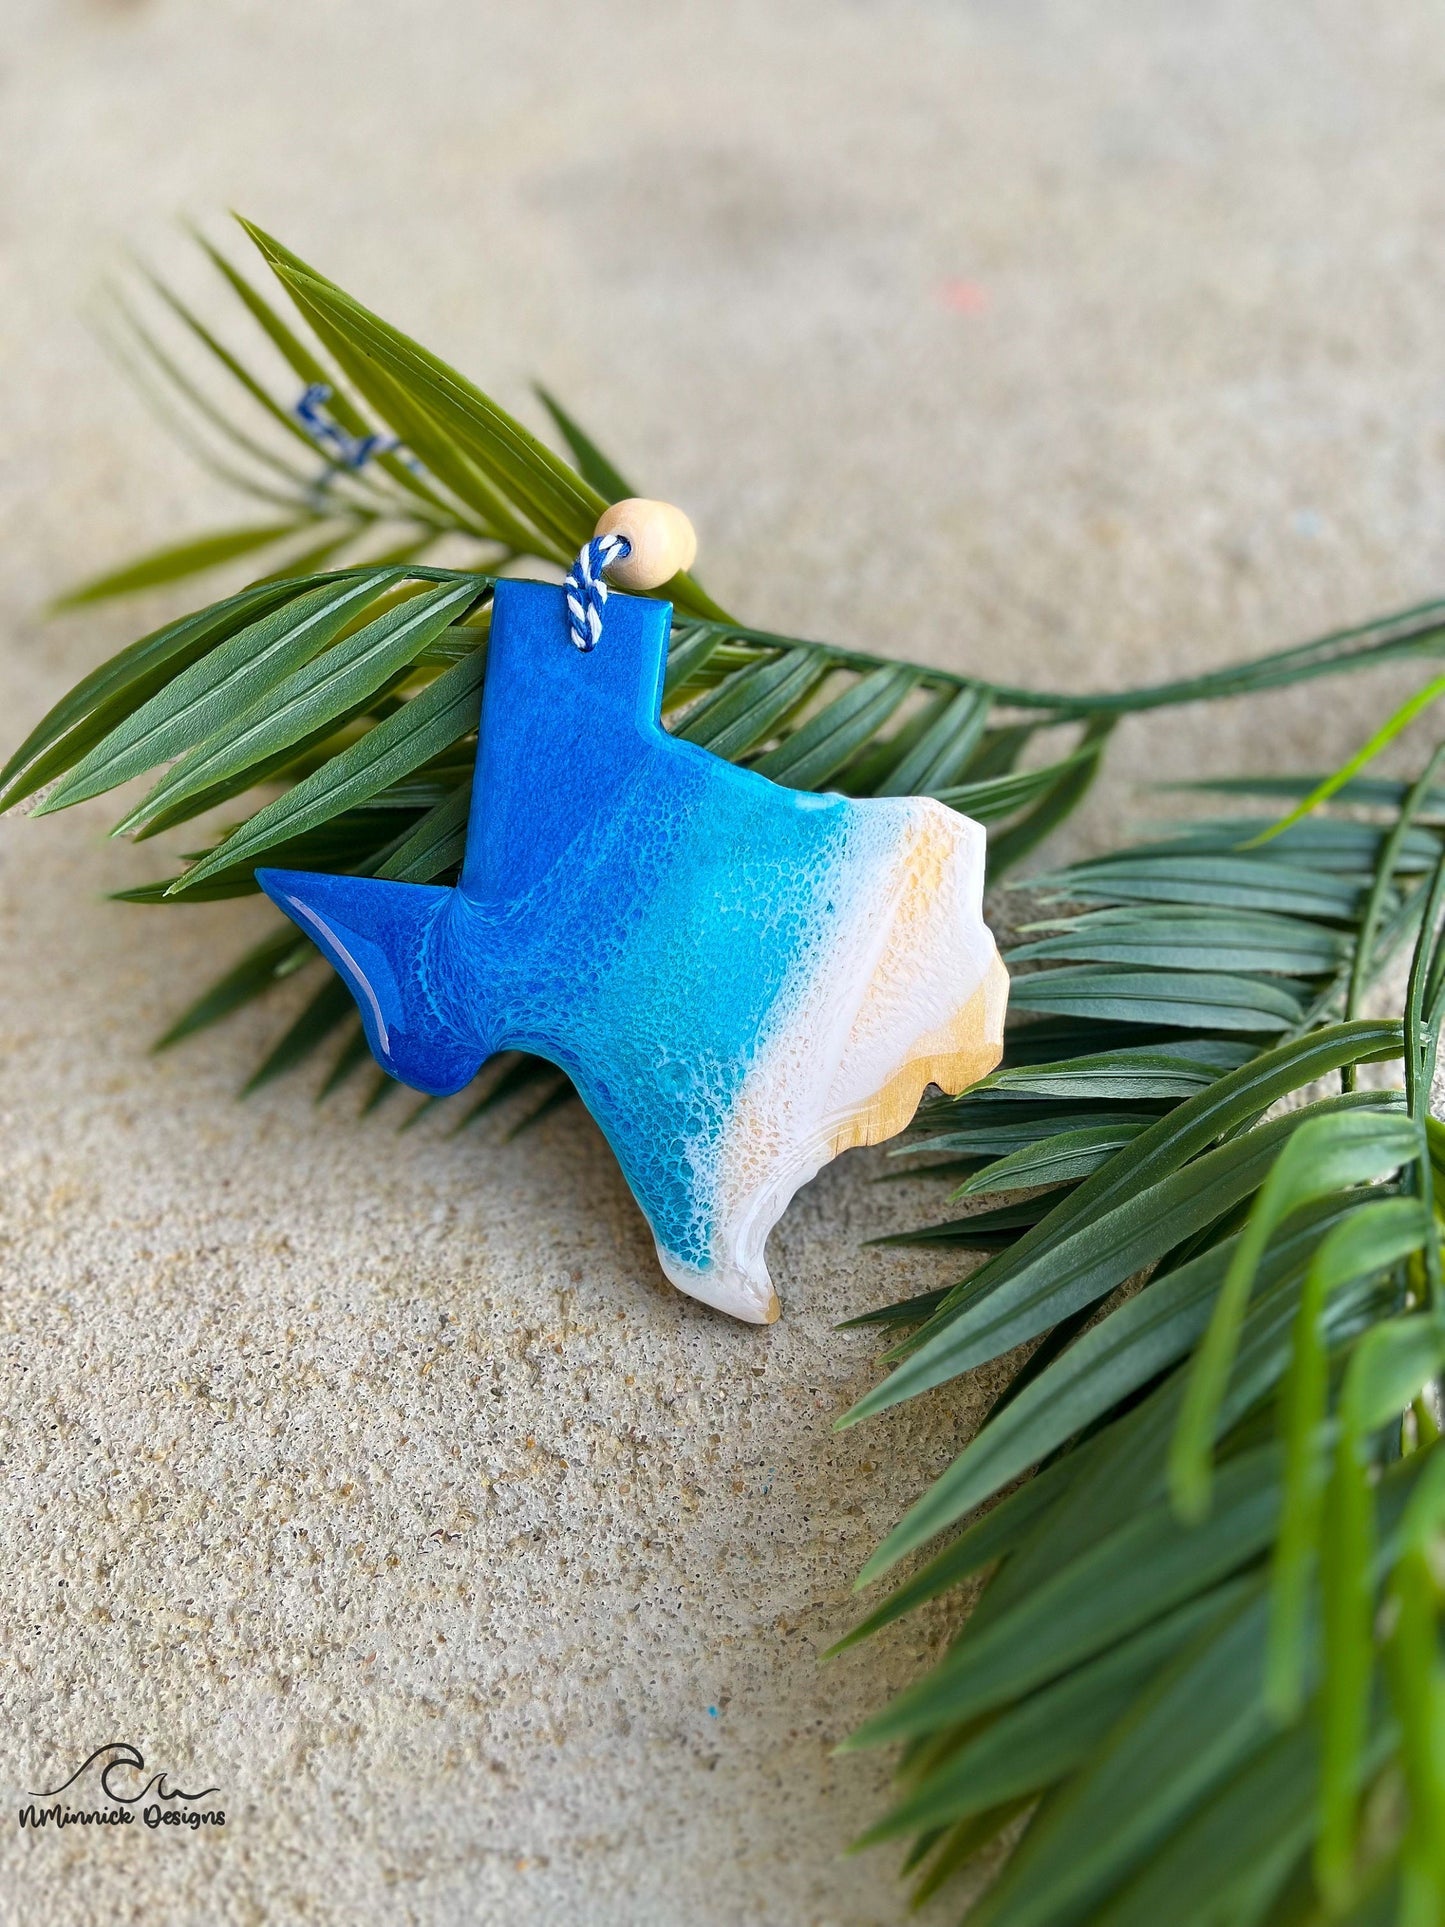 Texas ornament with ocean resin art laying against palm leaves.